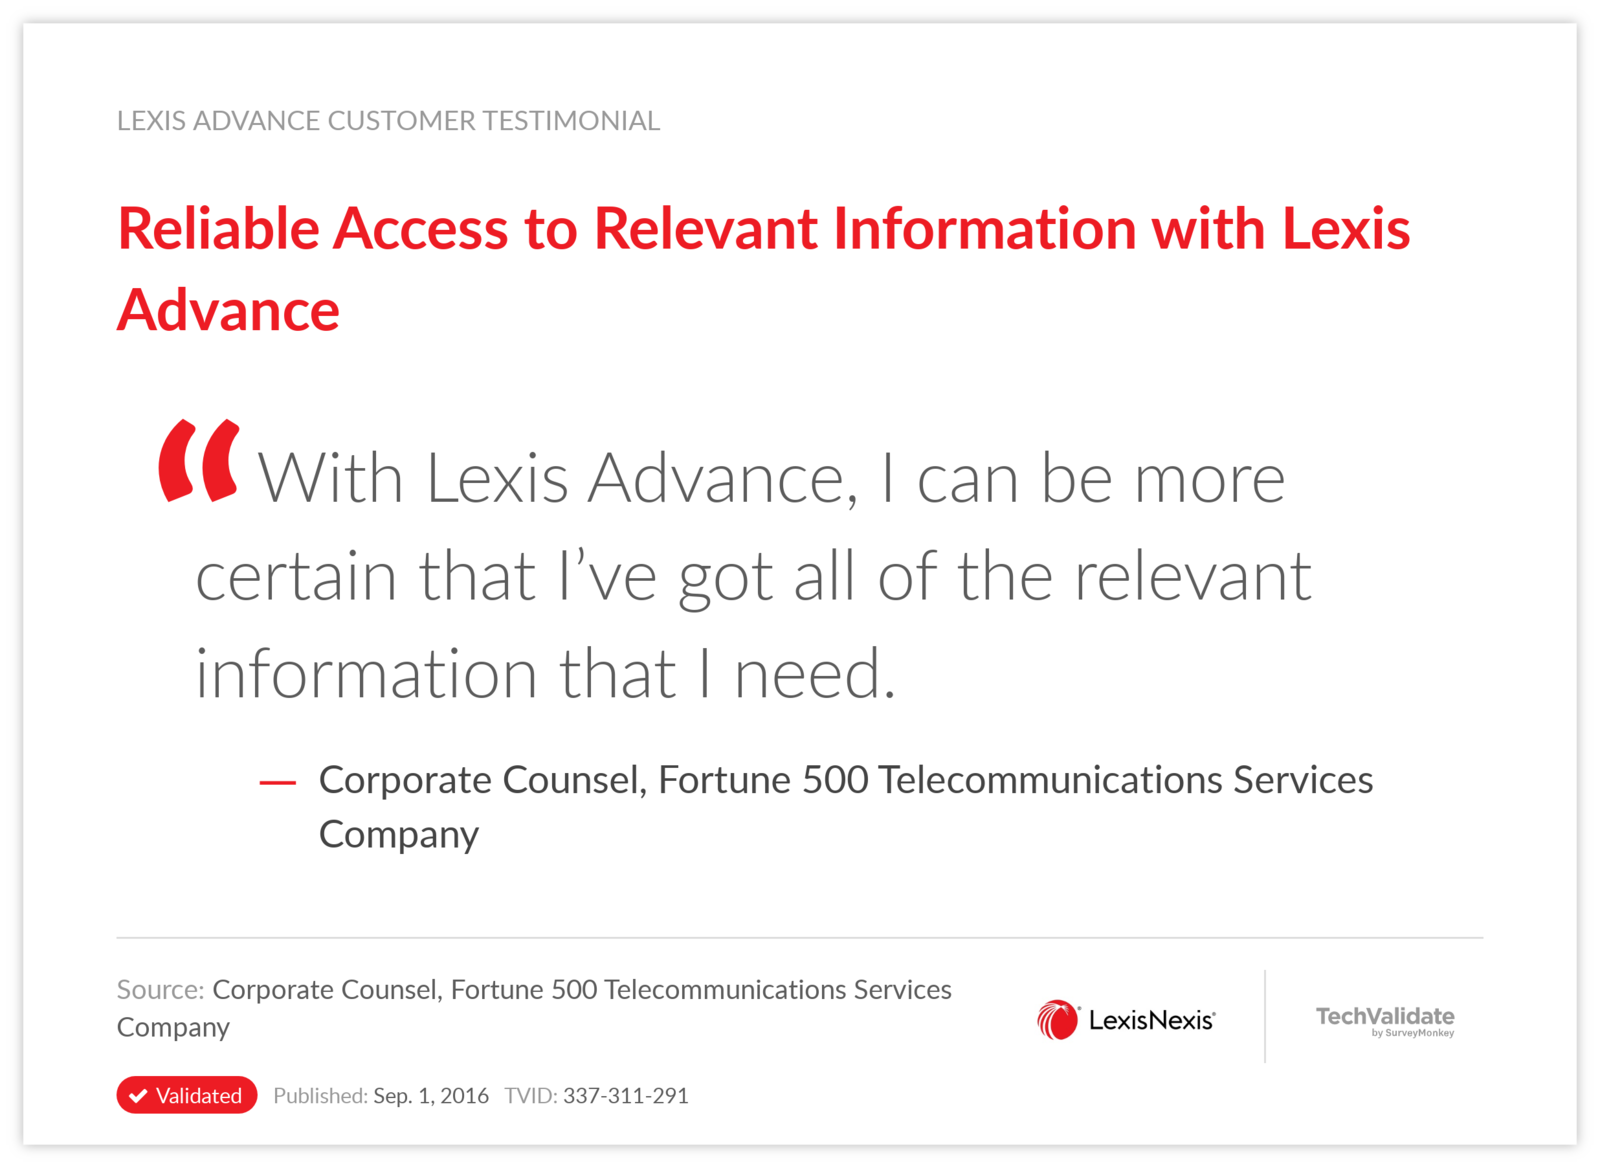 Reliable Access to Relevant Information with Lexis Advance